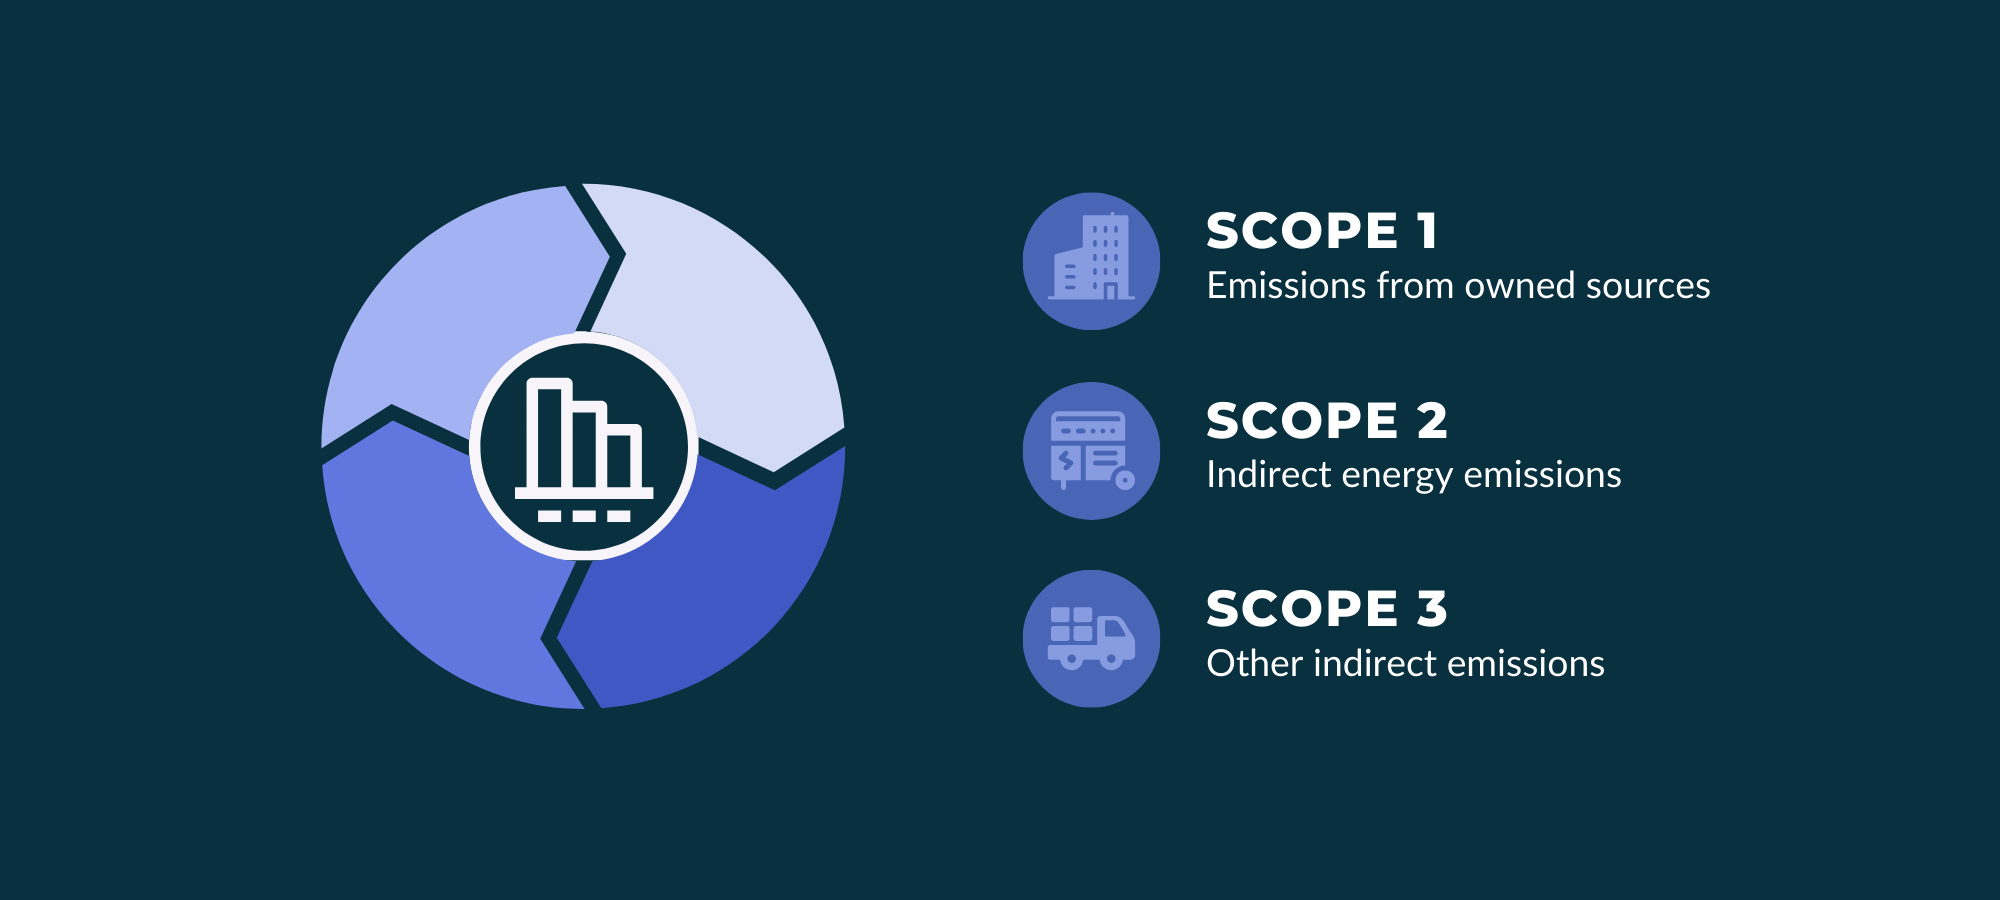 What are scopes 1, 2, and 3 of a corporate carbon report?